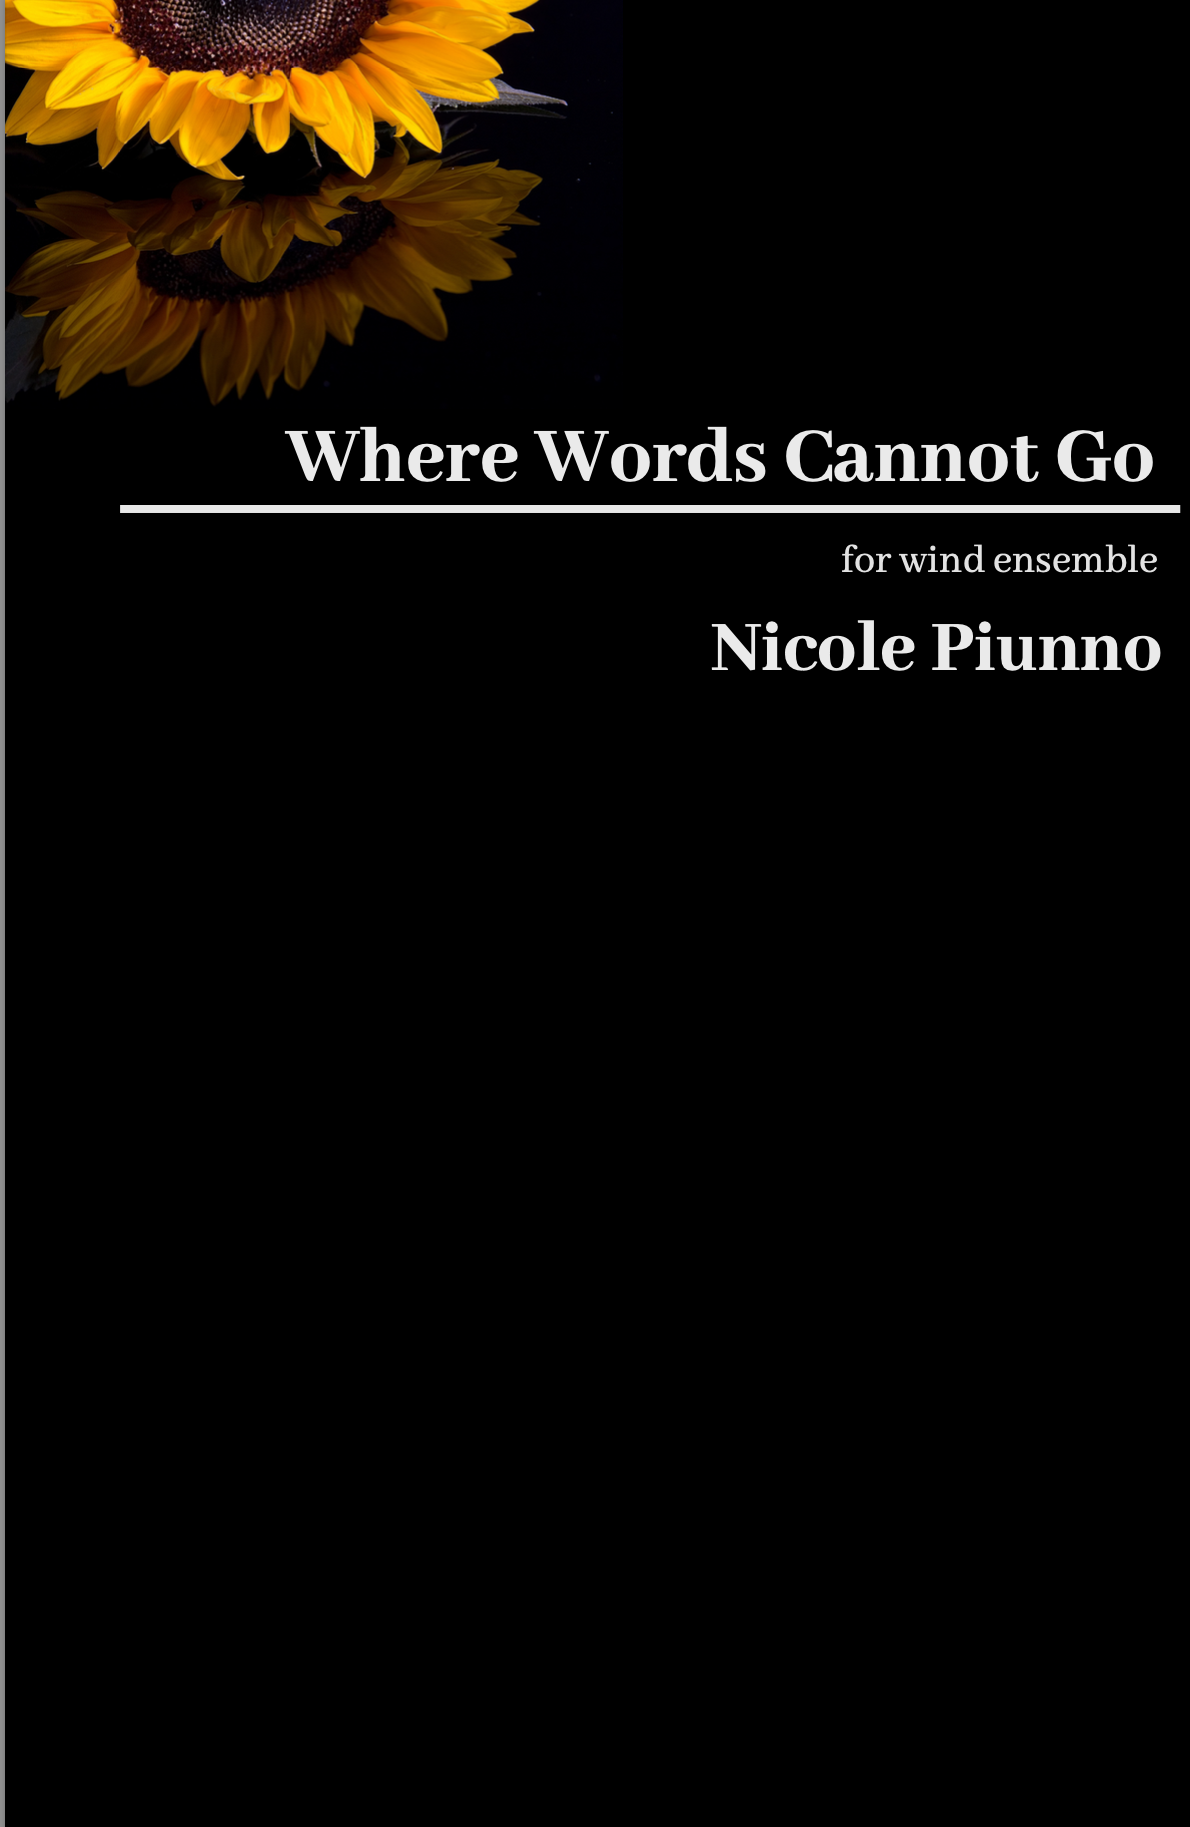 Where Words Cannot Go by Nicole Piunno